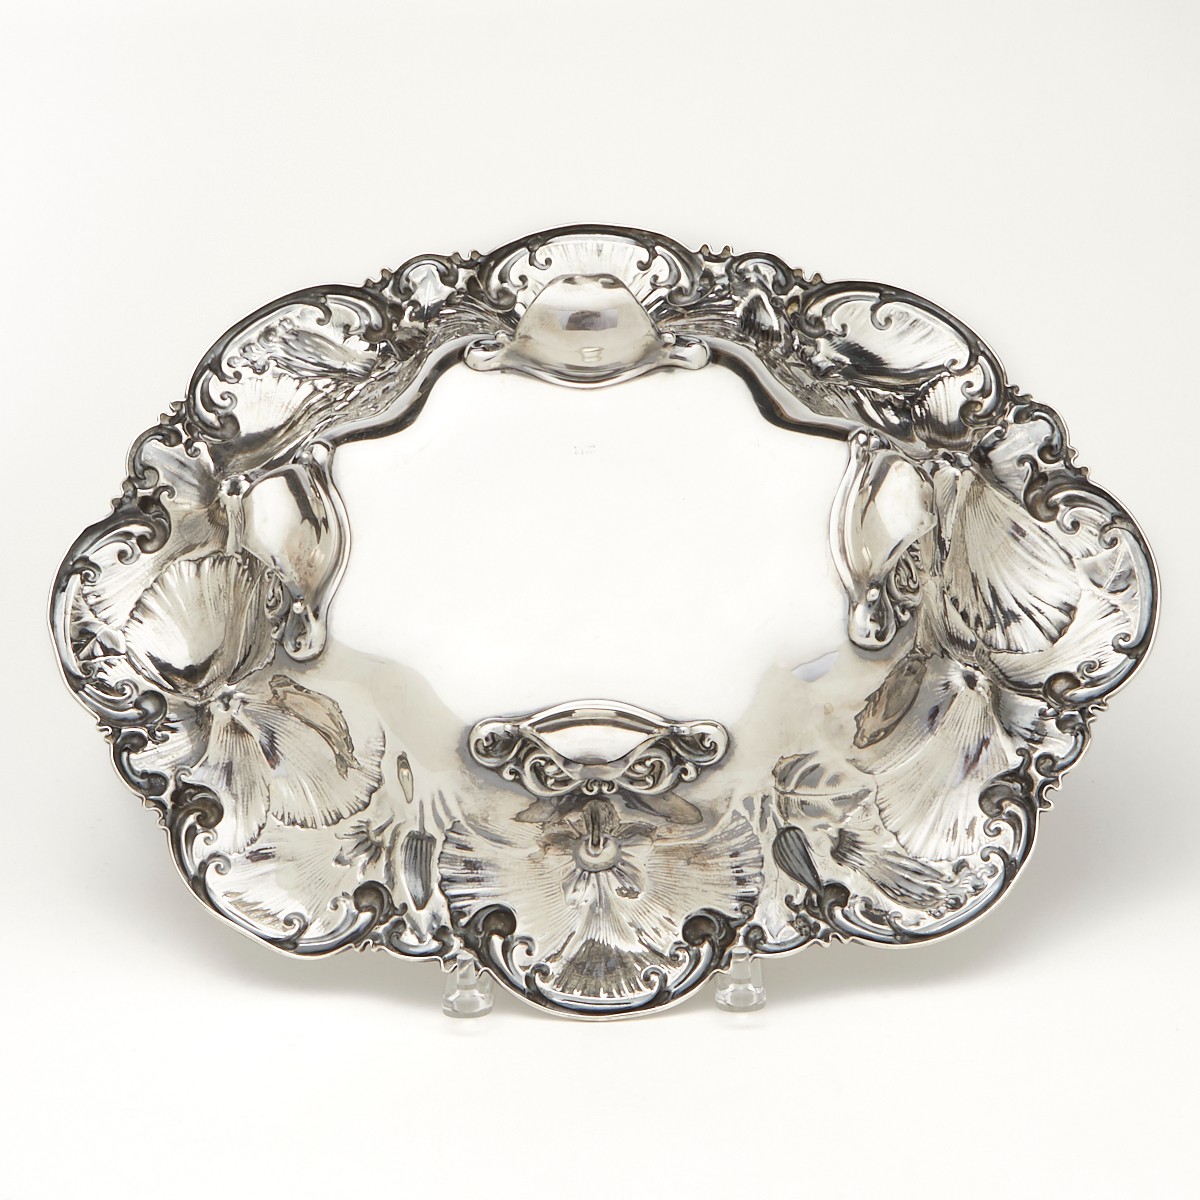 Large Whiting Sterling Art Nouveau Platter - Image 3 of 5